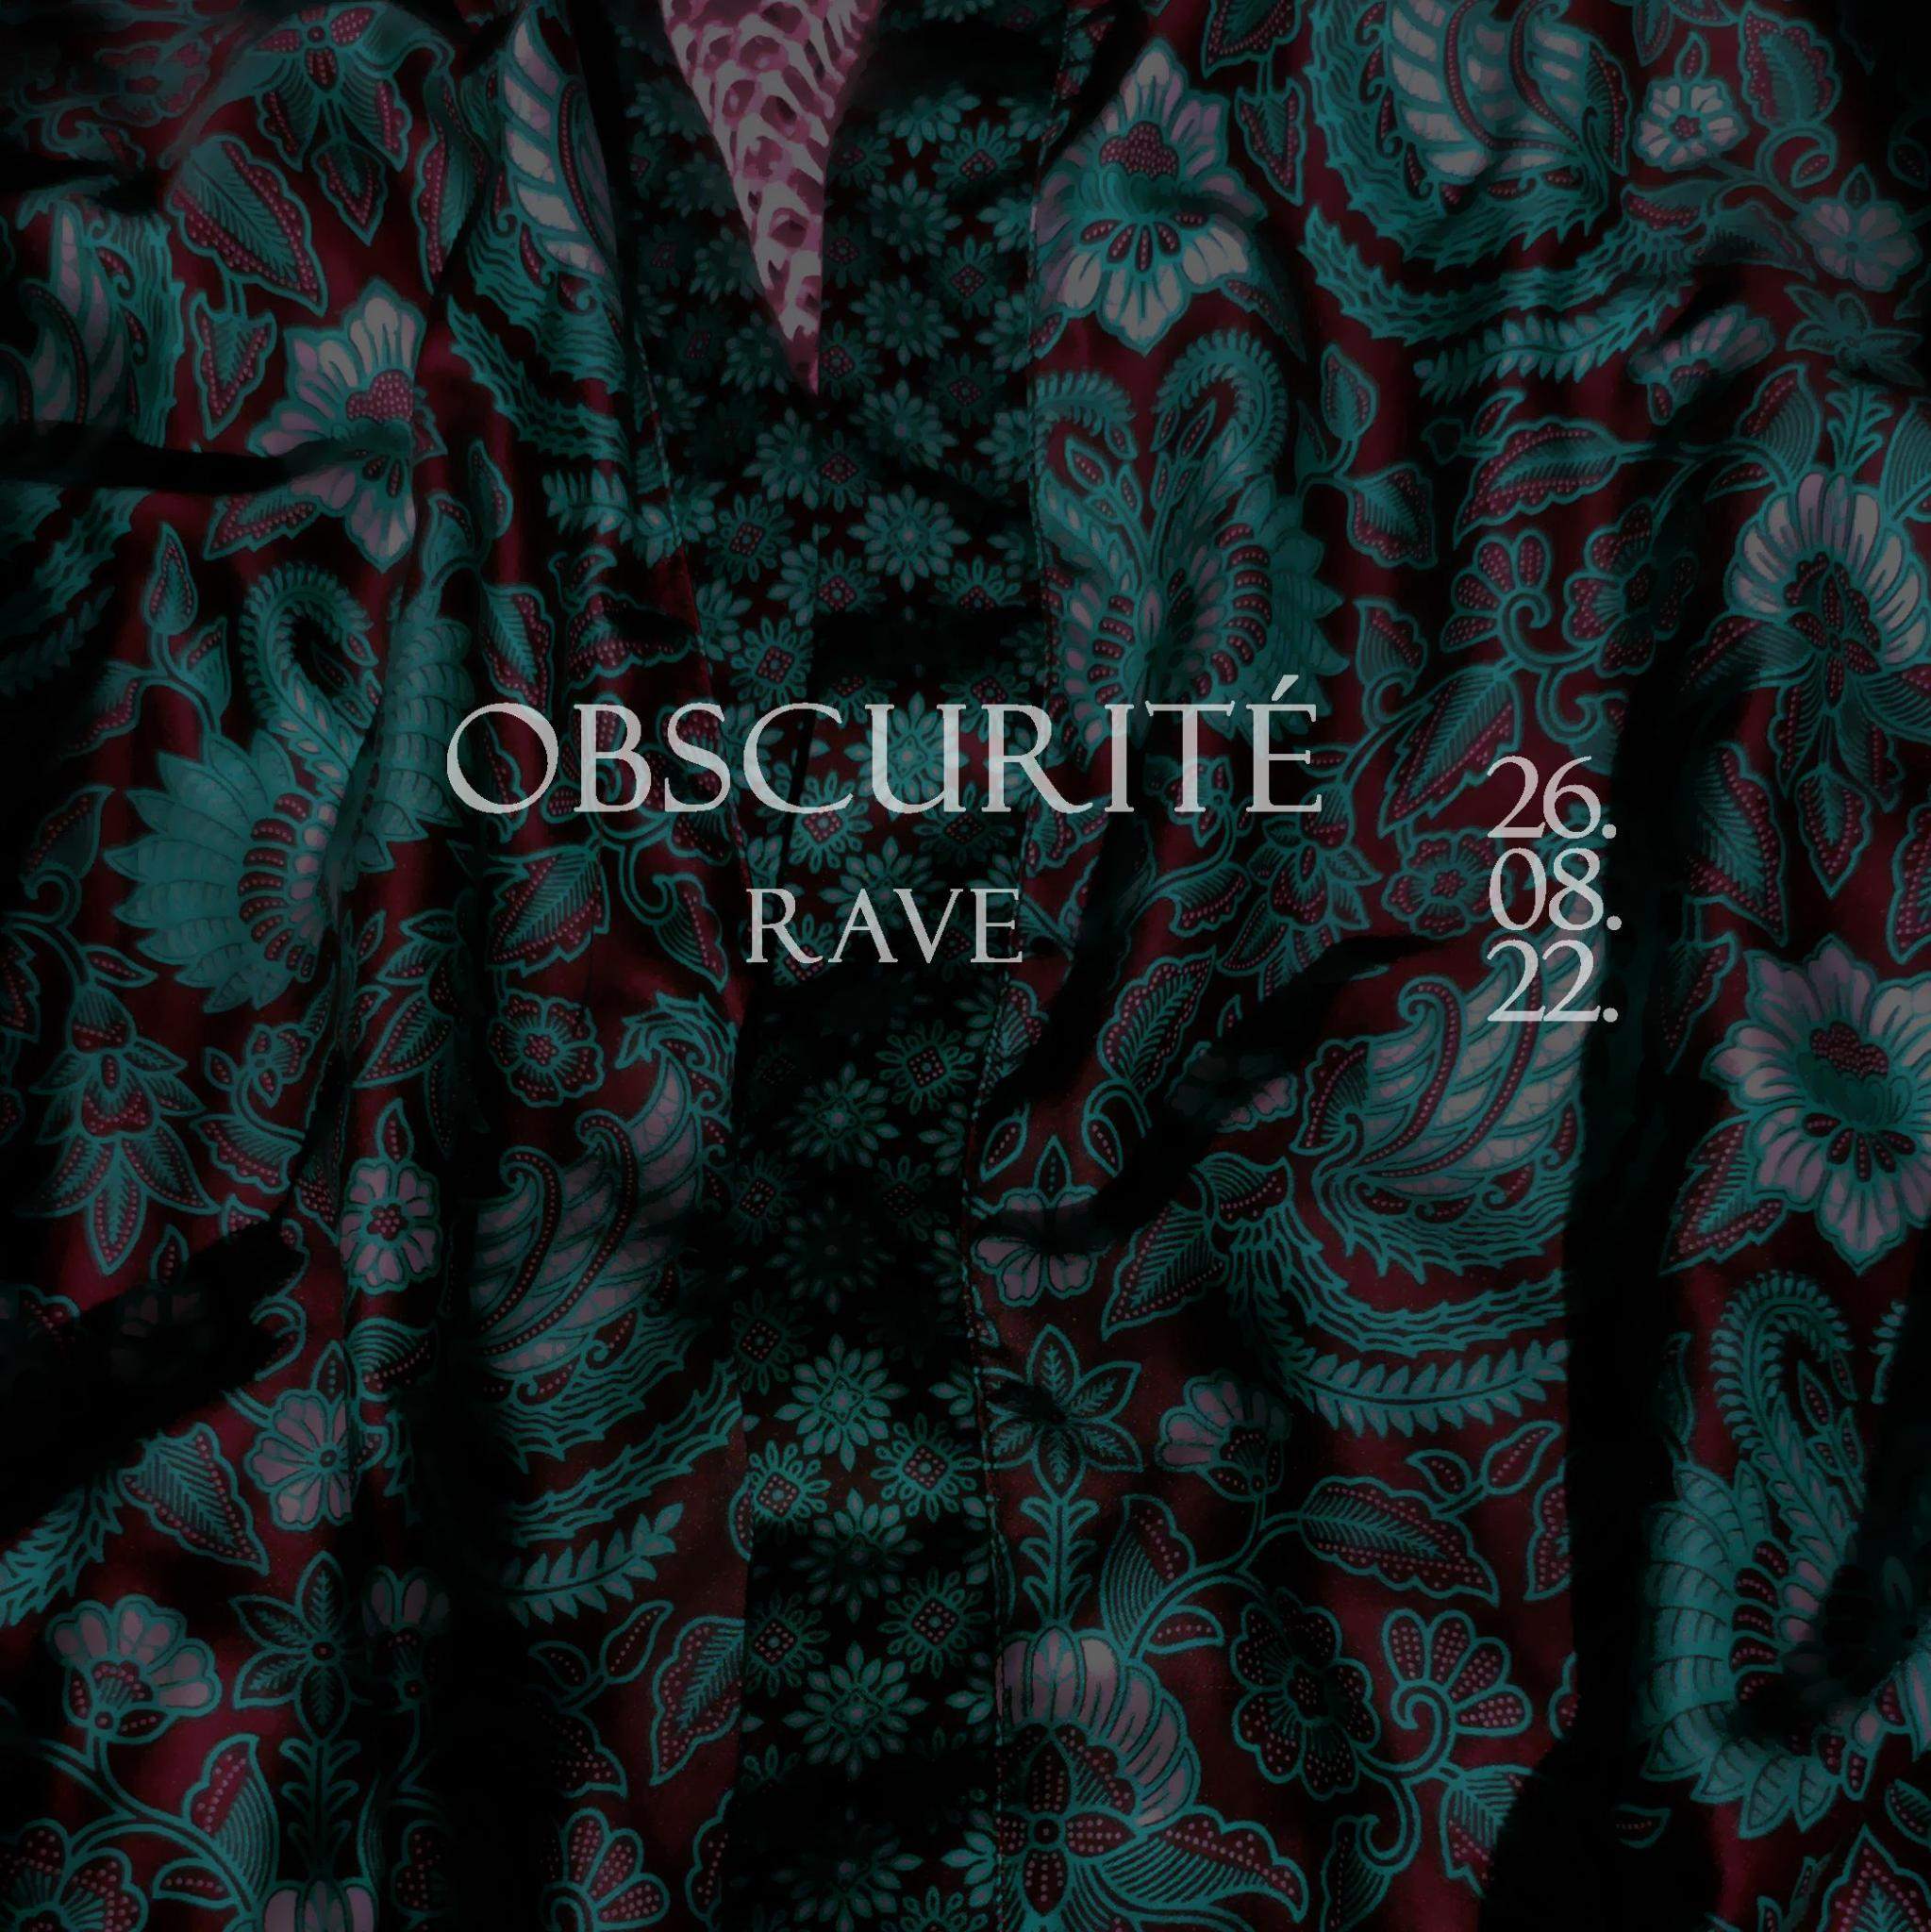 OBSCURITĖ - フライヤー表